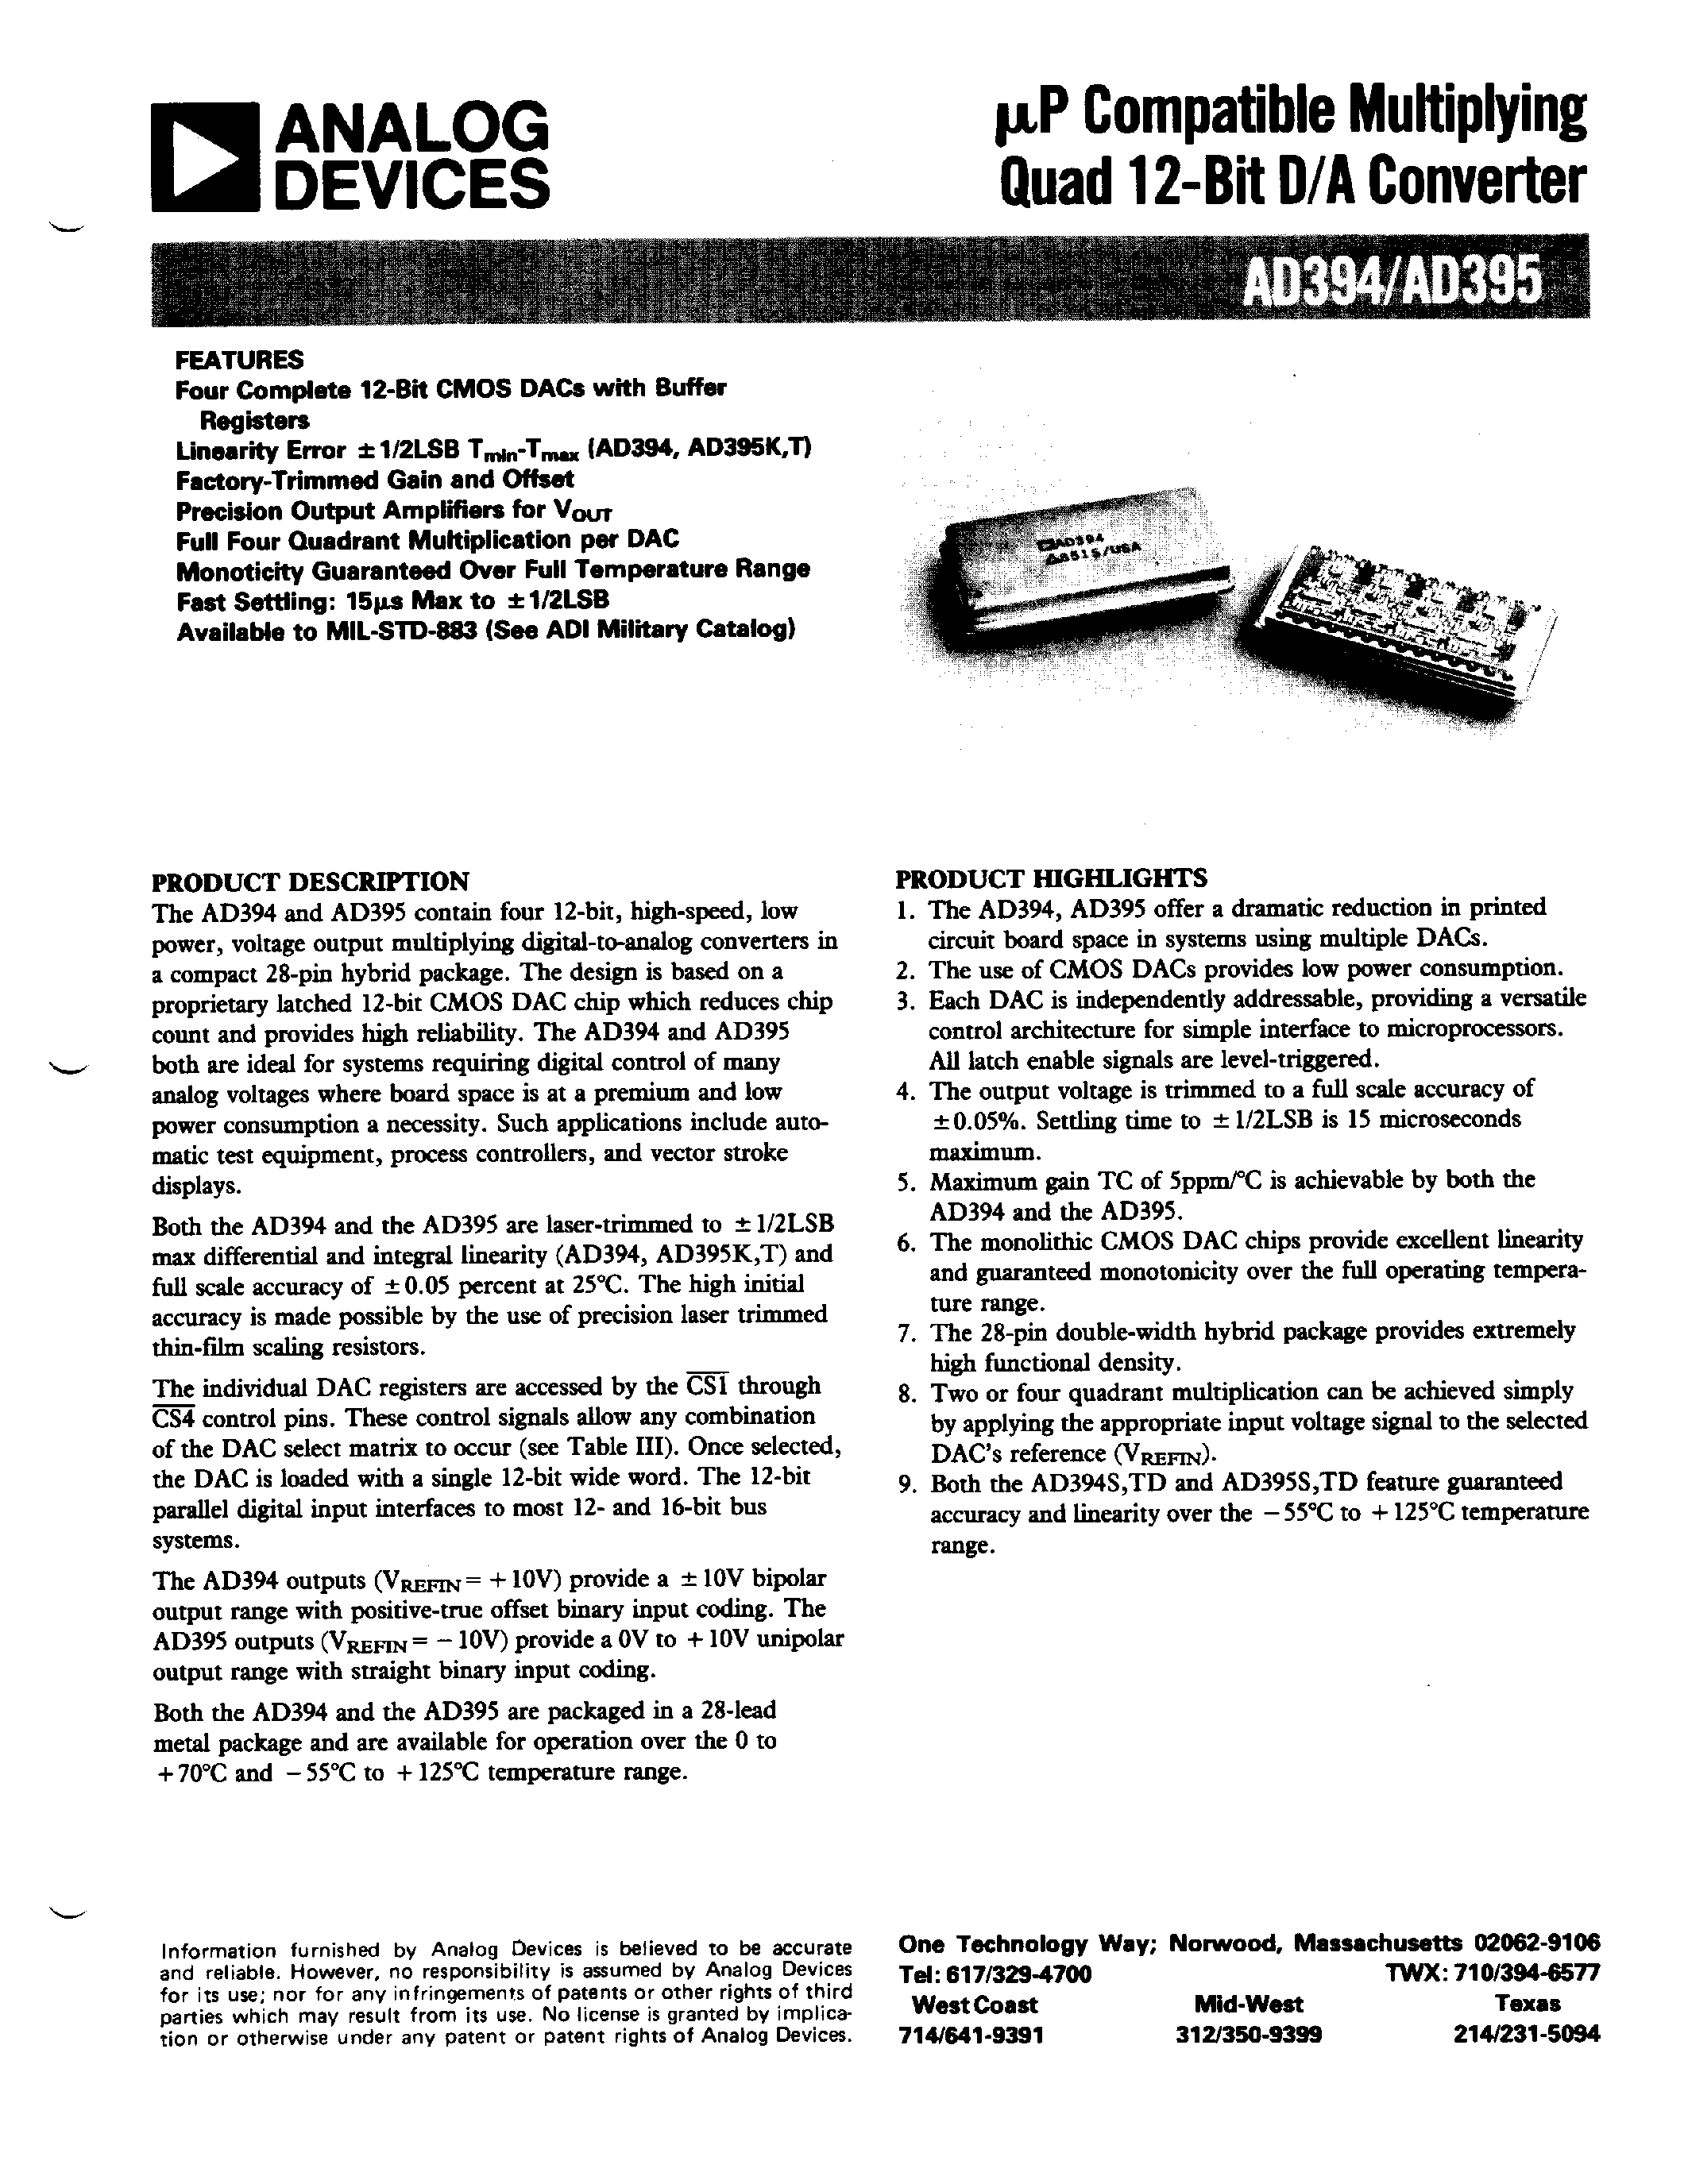 Datasheet AD394 - uP Compatible Multiplying Quad 12-Bit D/A Converter page 1